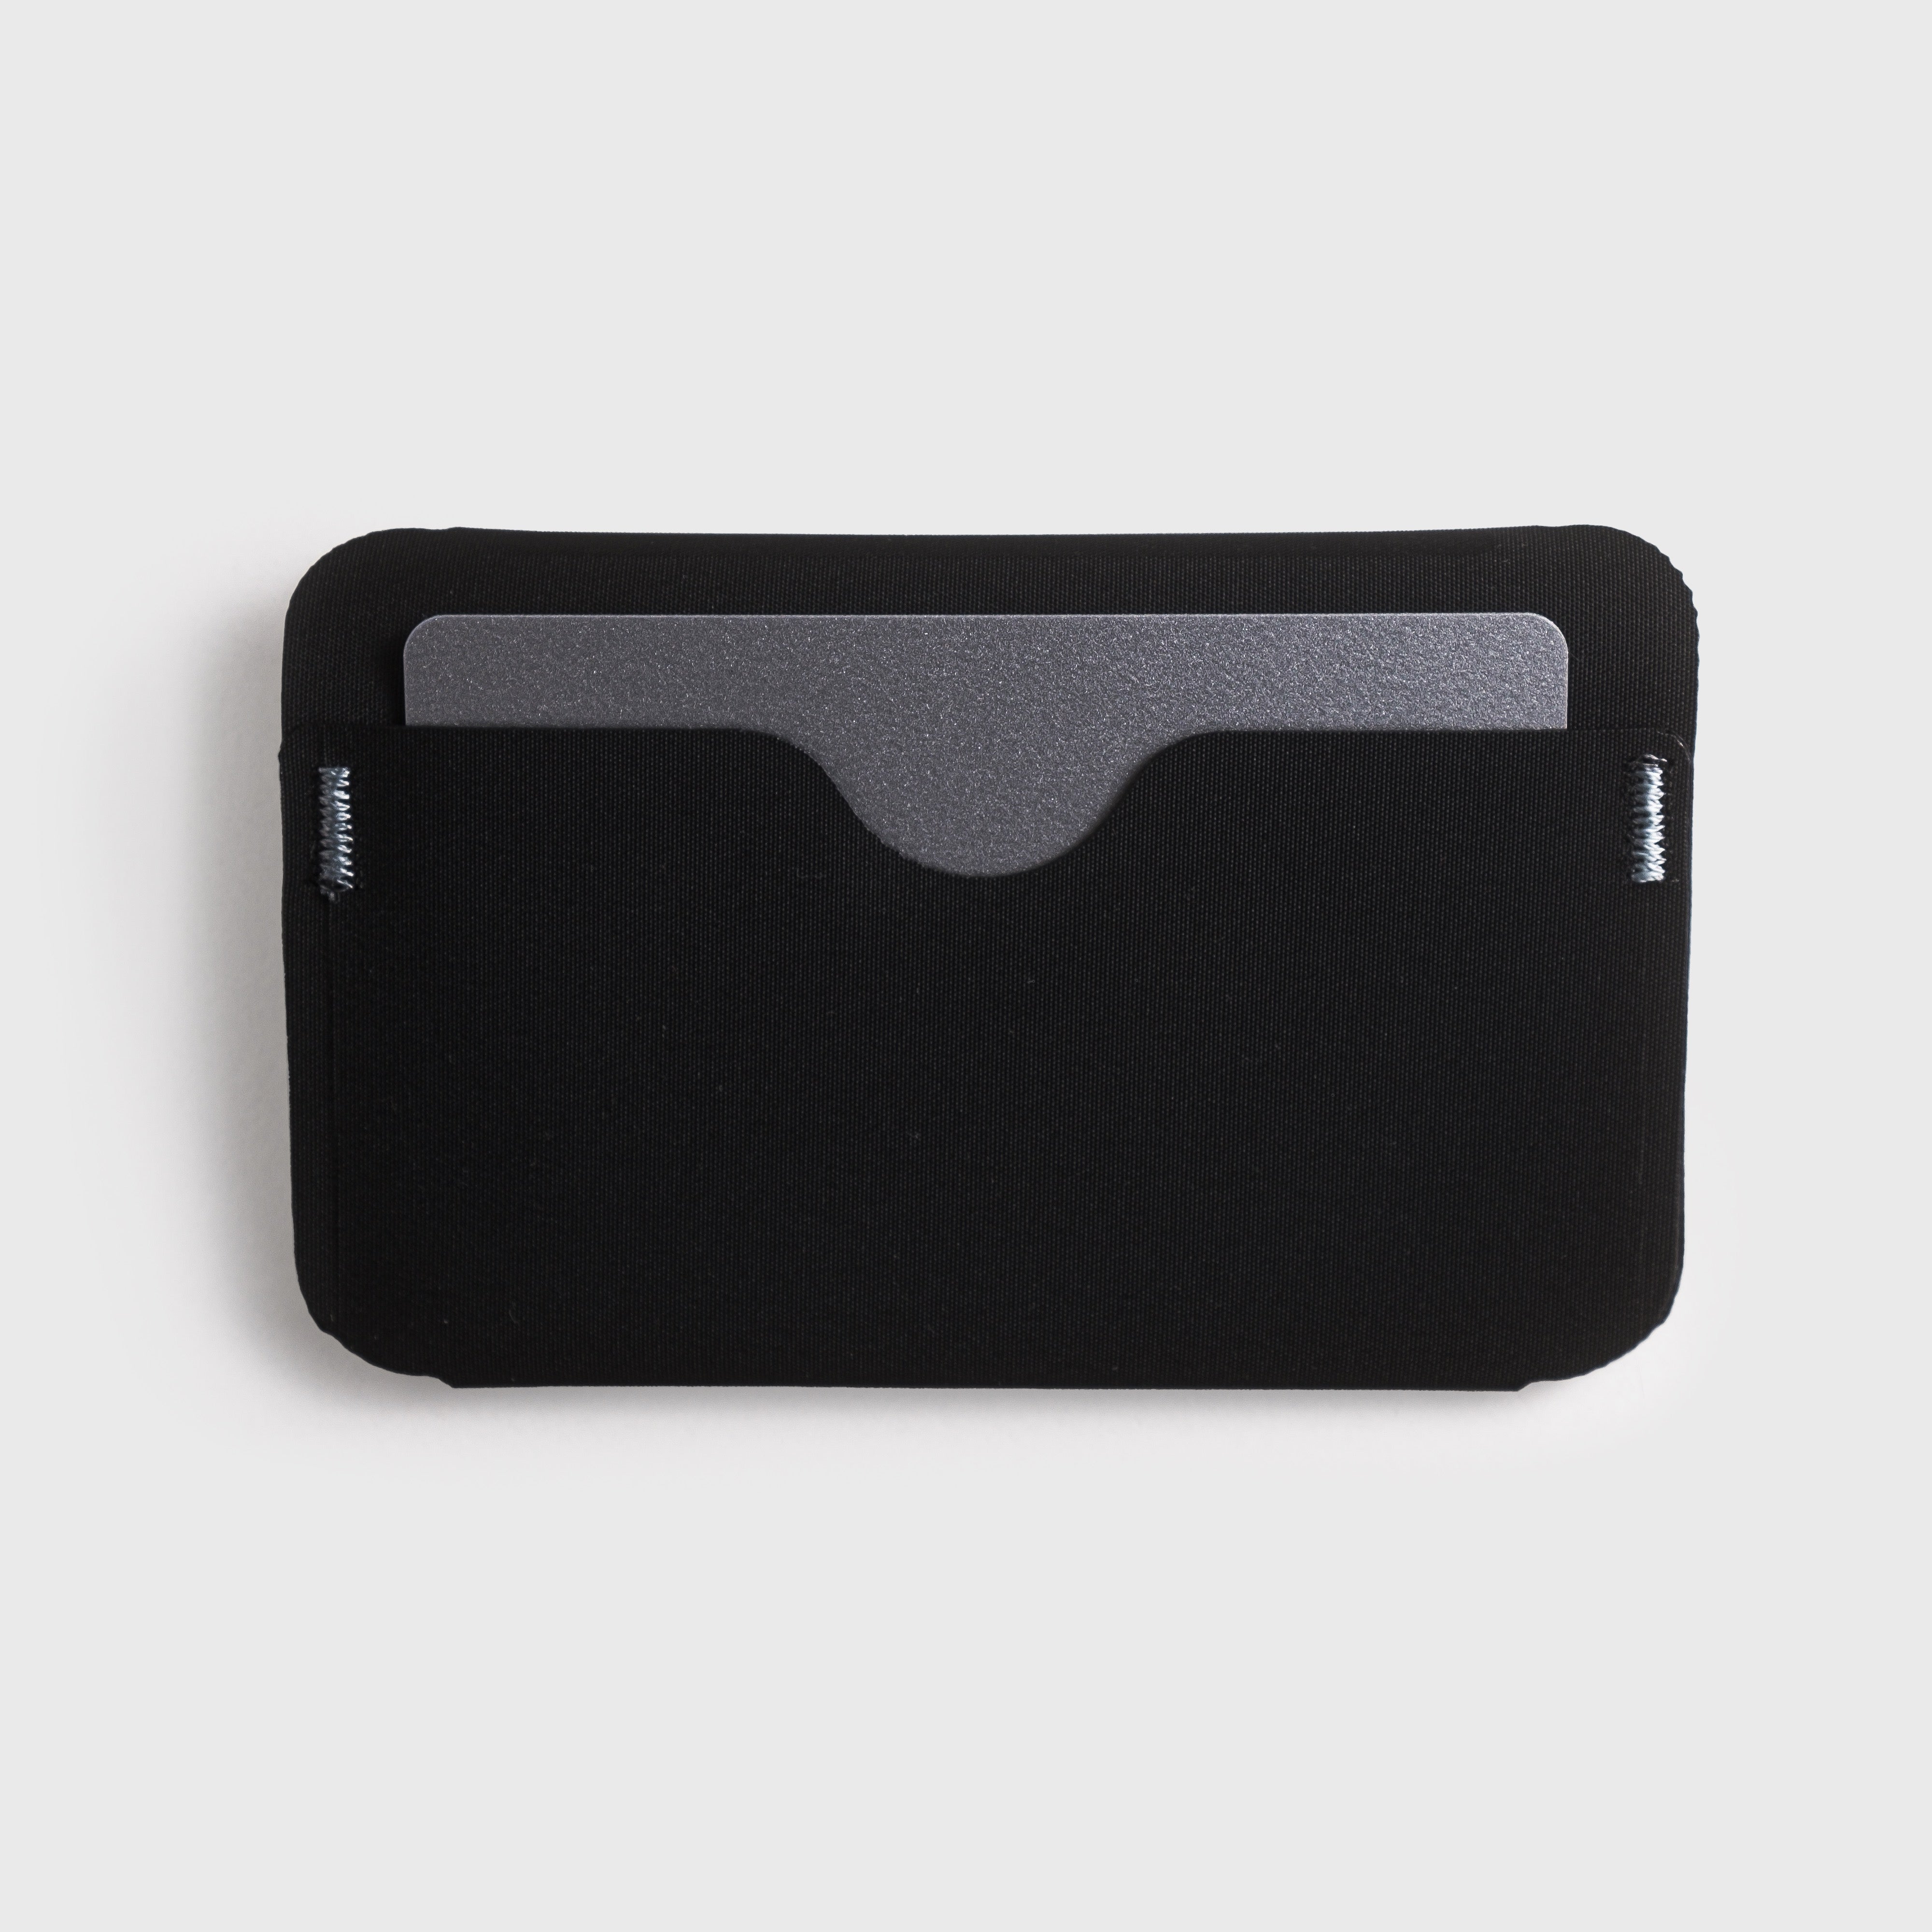 RE:FORM RE:01 Card Holder for Credit Cards and Bills